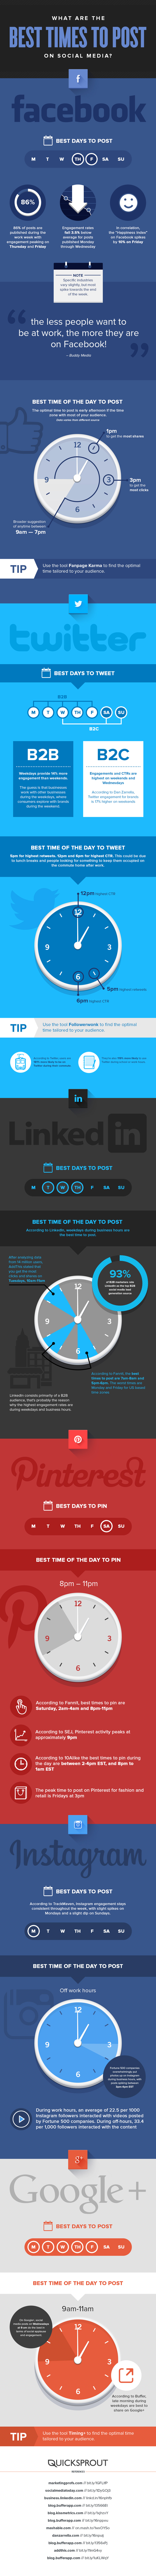 BestTime_Infographic